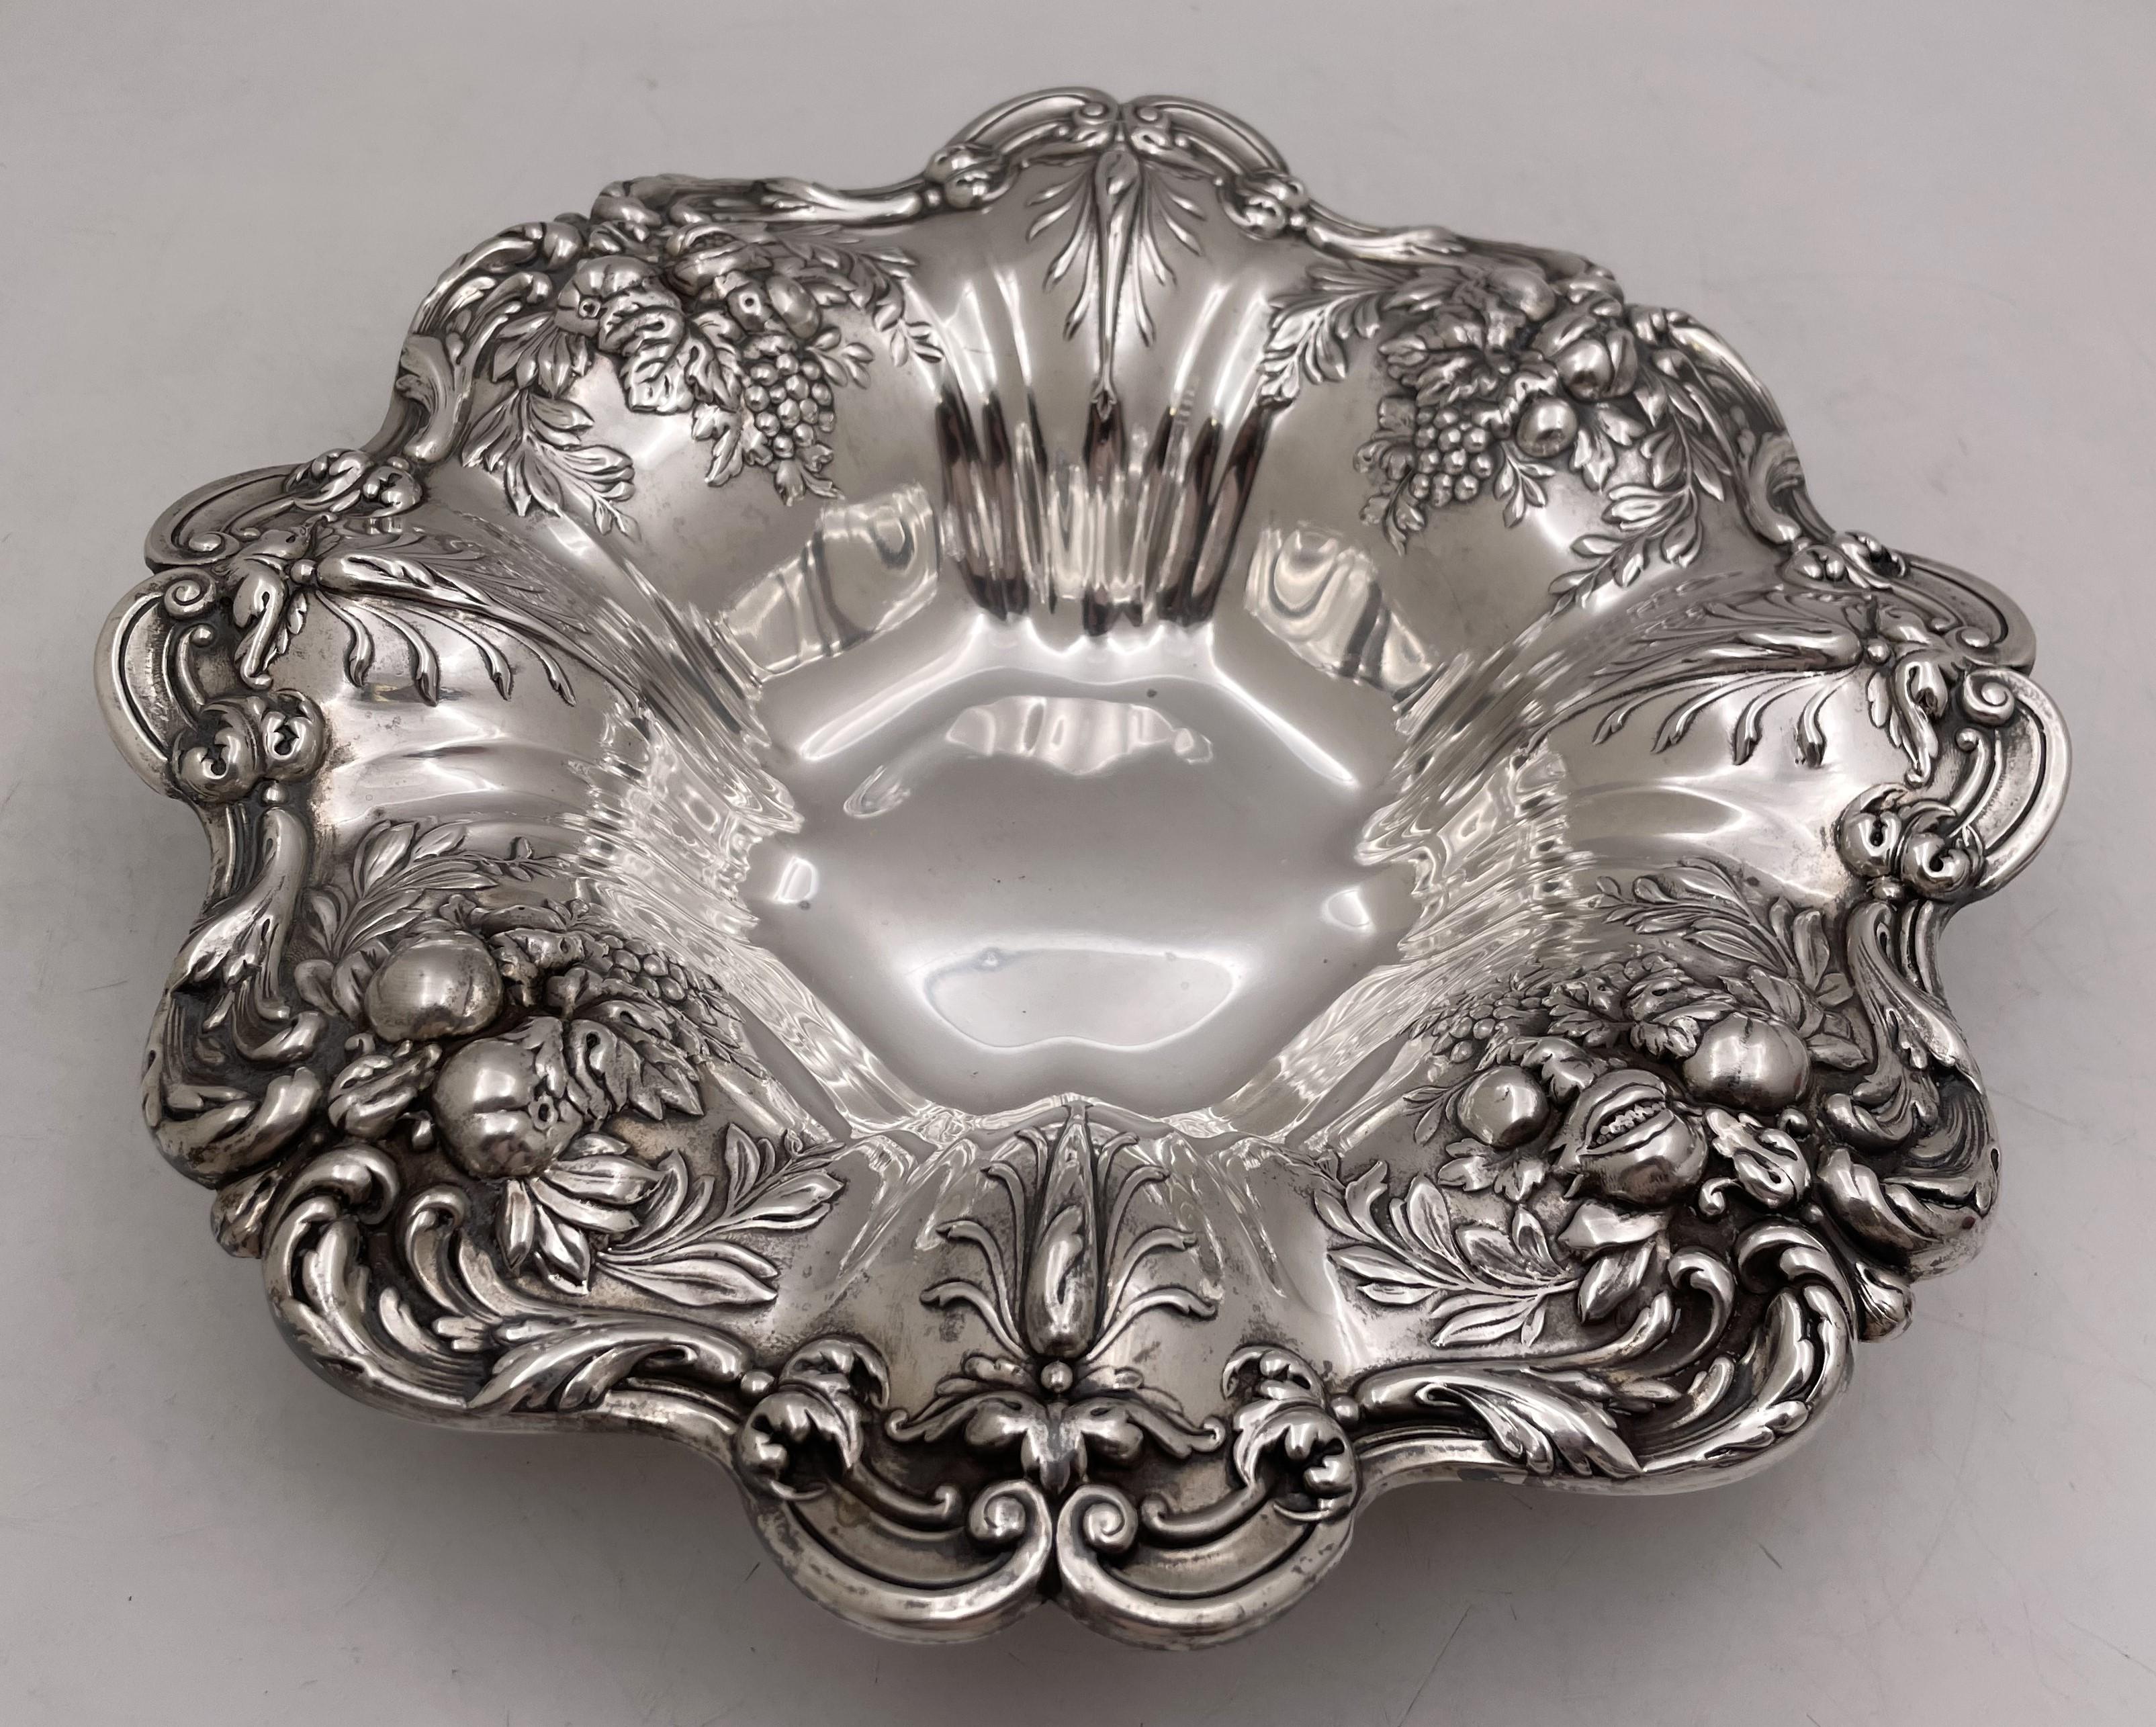 Reed & Barton sterling silver bowl in Francis I pattern number X569 and in Art Nouveau style, richly adorned with fruits and flowers. It measures 11 1/3'' in diameter by 2 2/3'' in height, weighs 20.8 troy ounces, and bears hallmarks as shown.